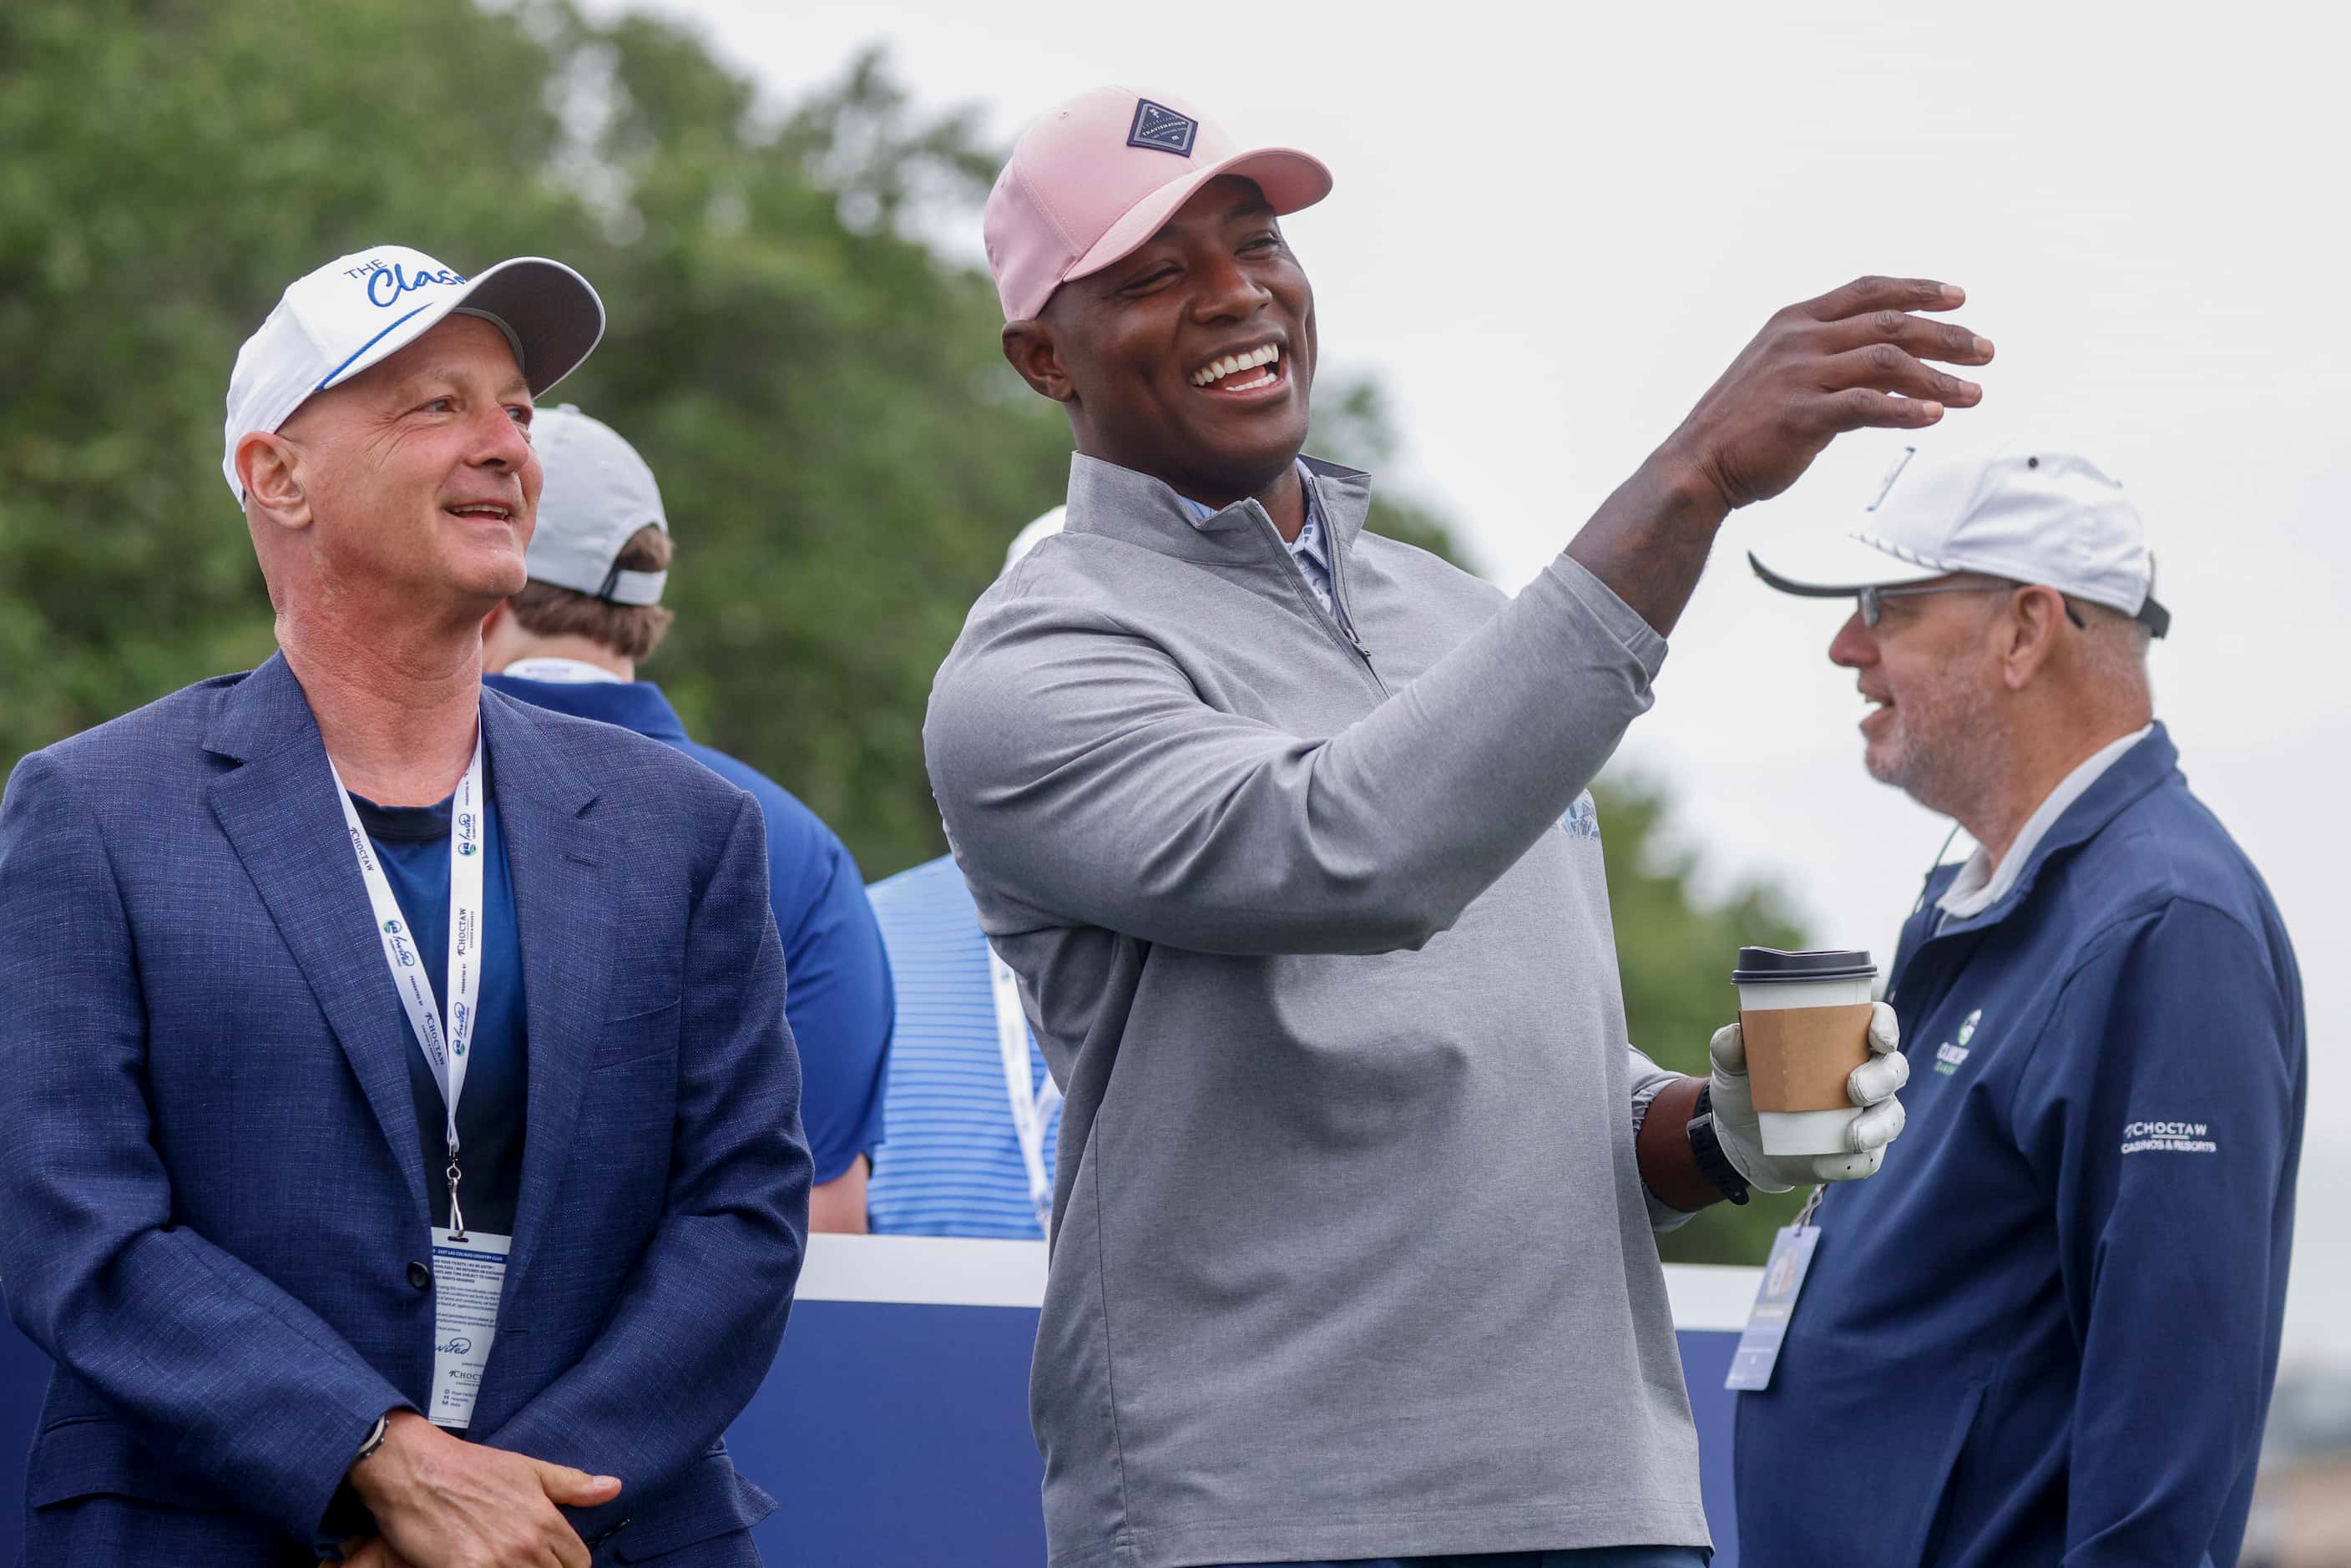 Former Dallas Cowboys player DeMarcus Ware laughs with a course official before the first...